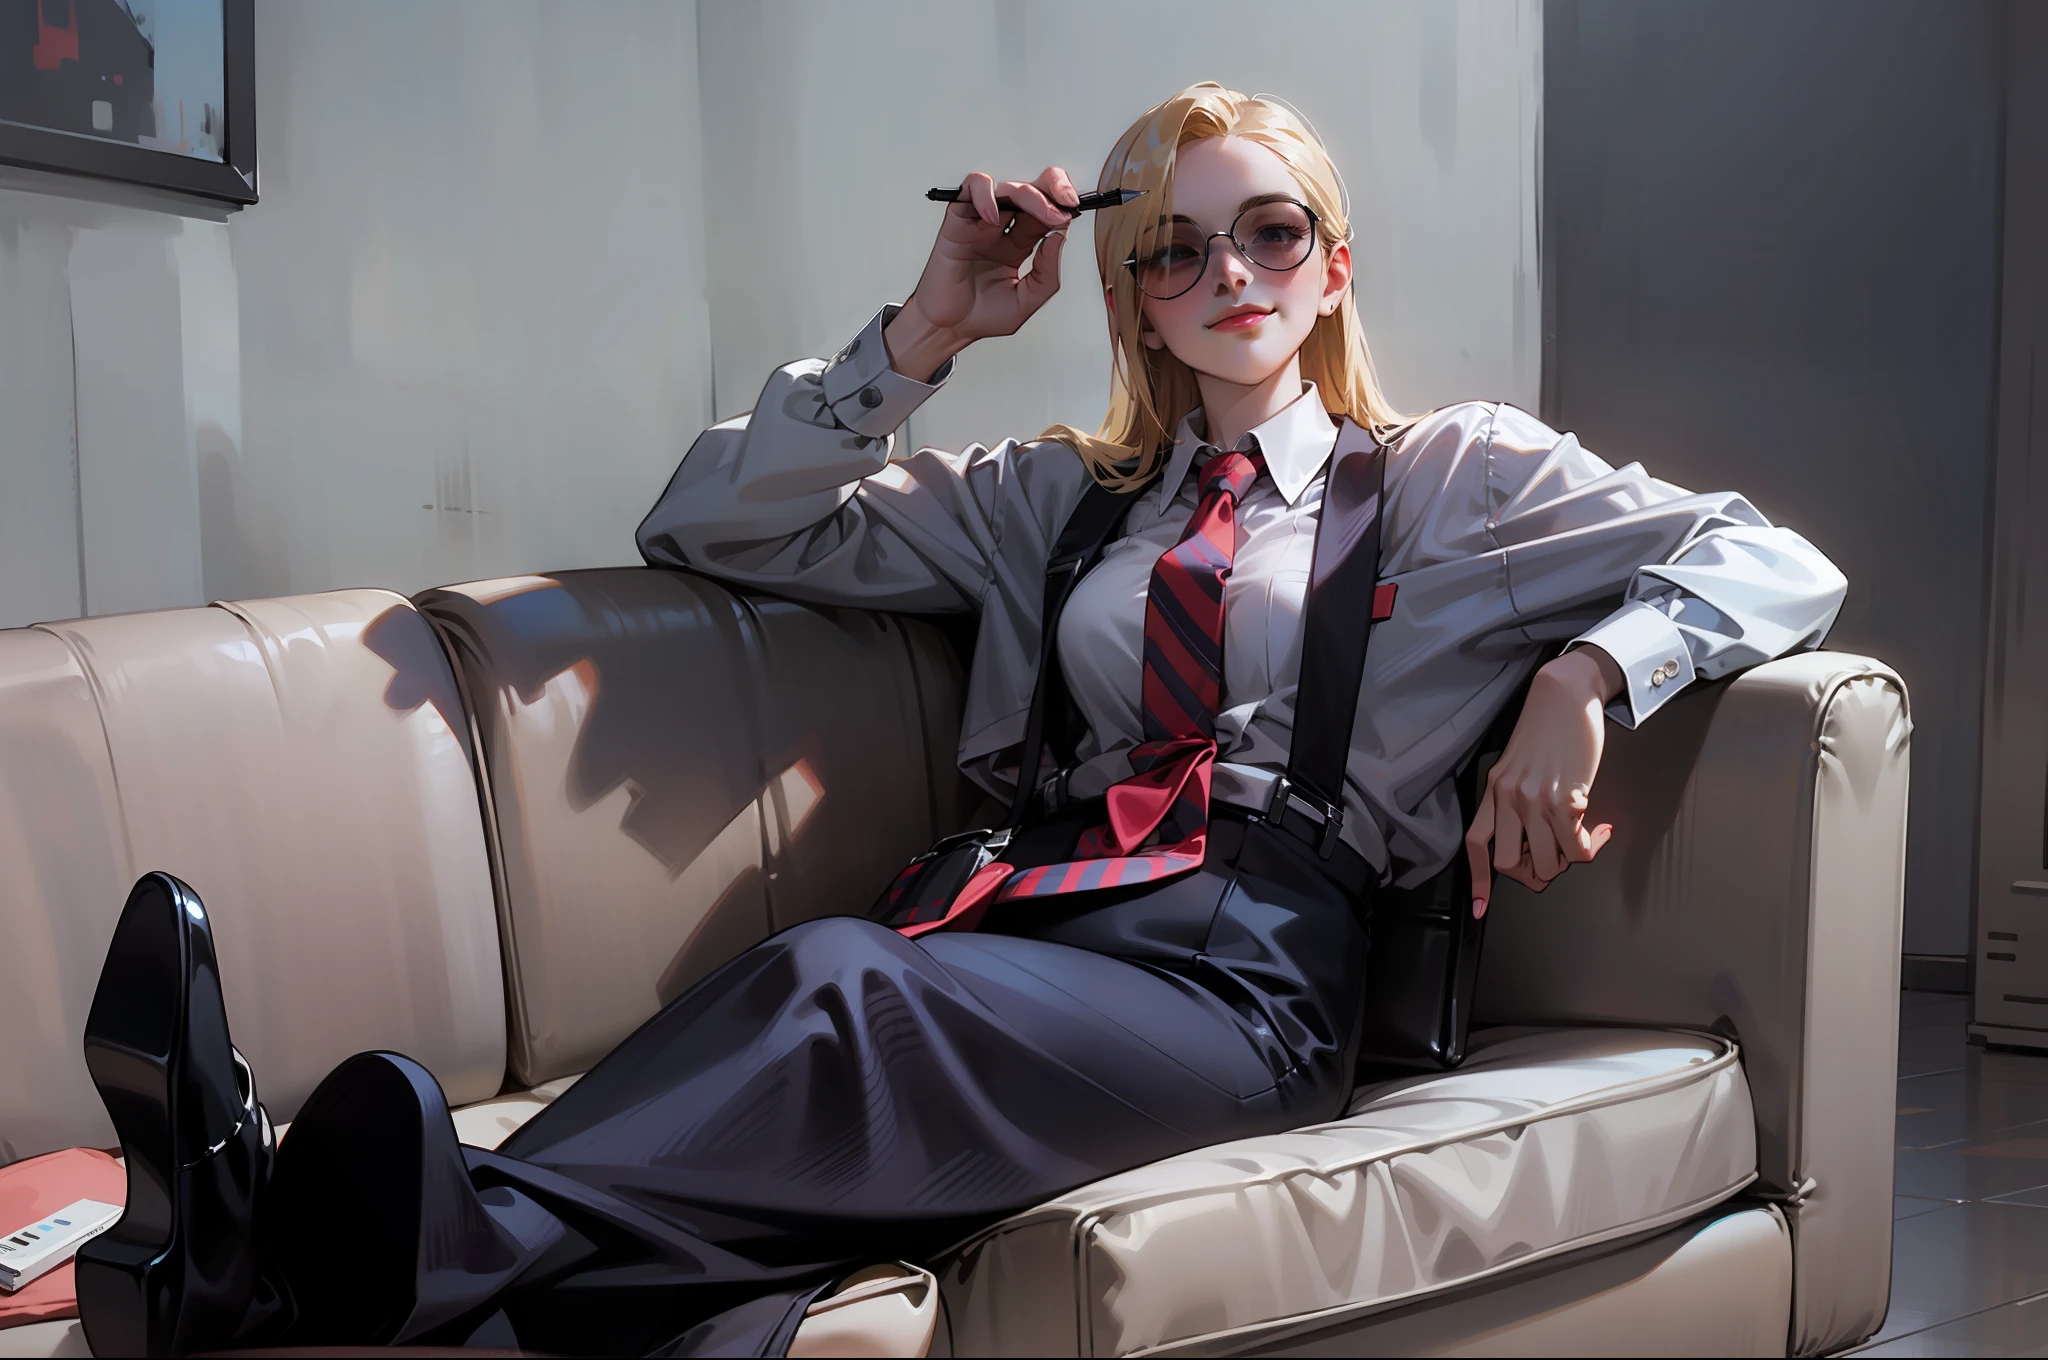 Anime style, Ridiculous, high resolution, super detailed), 1 girl, beautiful, solo, mature, (layback long blonde hair flowing on shoulders with long parted bangs), medium breasts, wide hips, crossed legs, short pencil skirt, black leggings, black high heels, sitting on white couch, holding pencil, placing arm on couch's border, highest detail, smiling with closed mouth, looking front, white background, dark shades sunglasses hiding eyes, relaxed eyebrows, striped dress shirt with long sleeves, red tie, dark blue suspenders